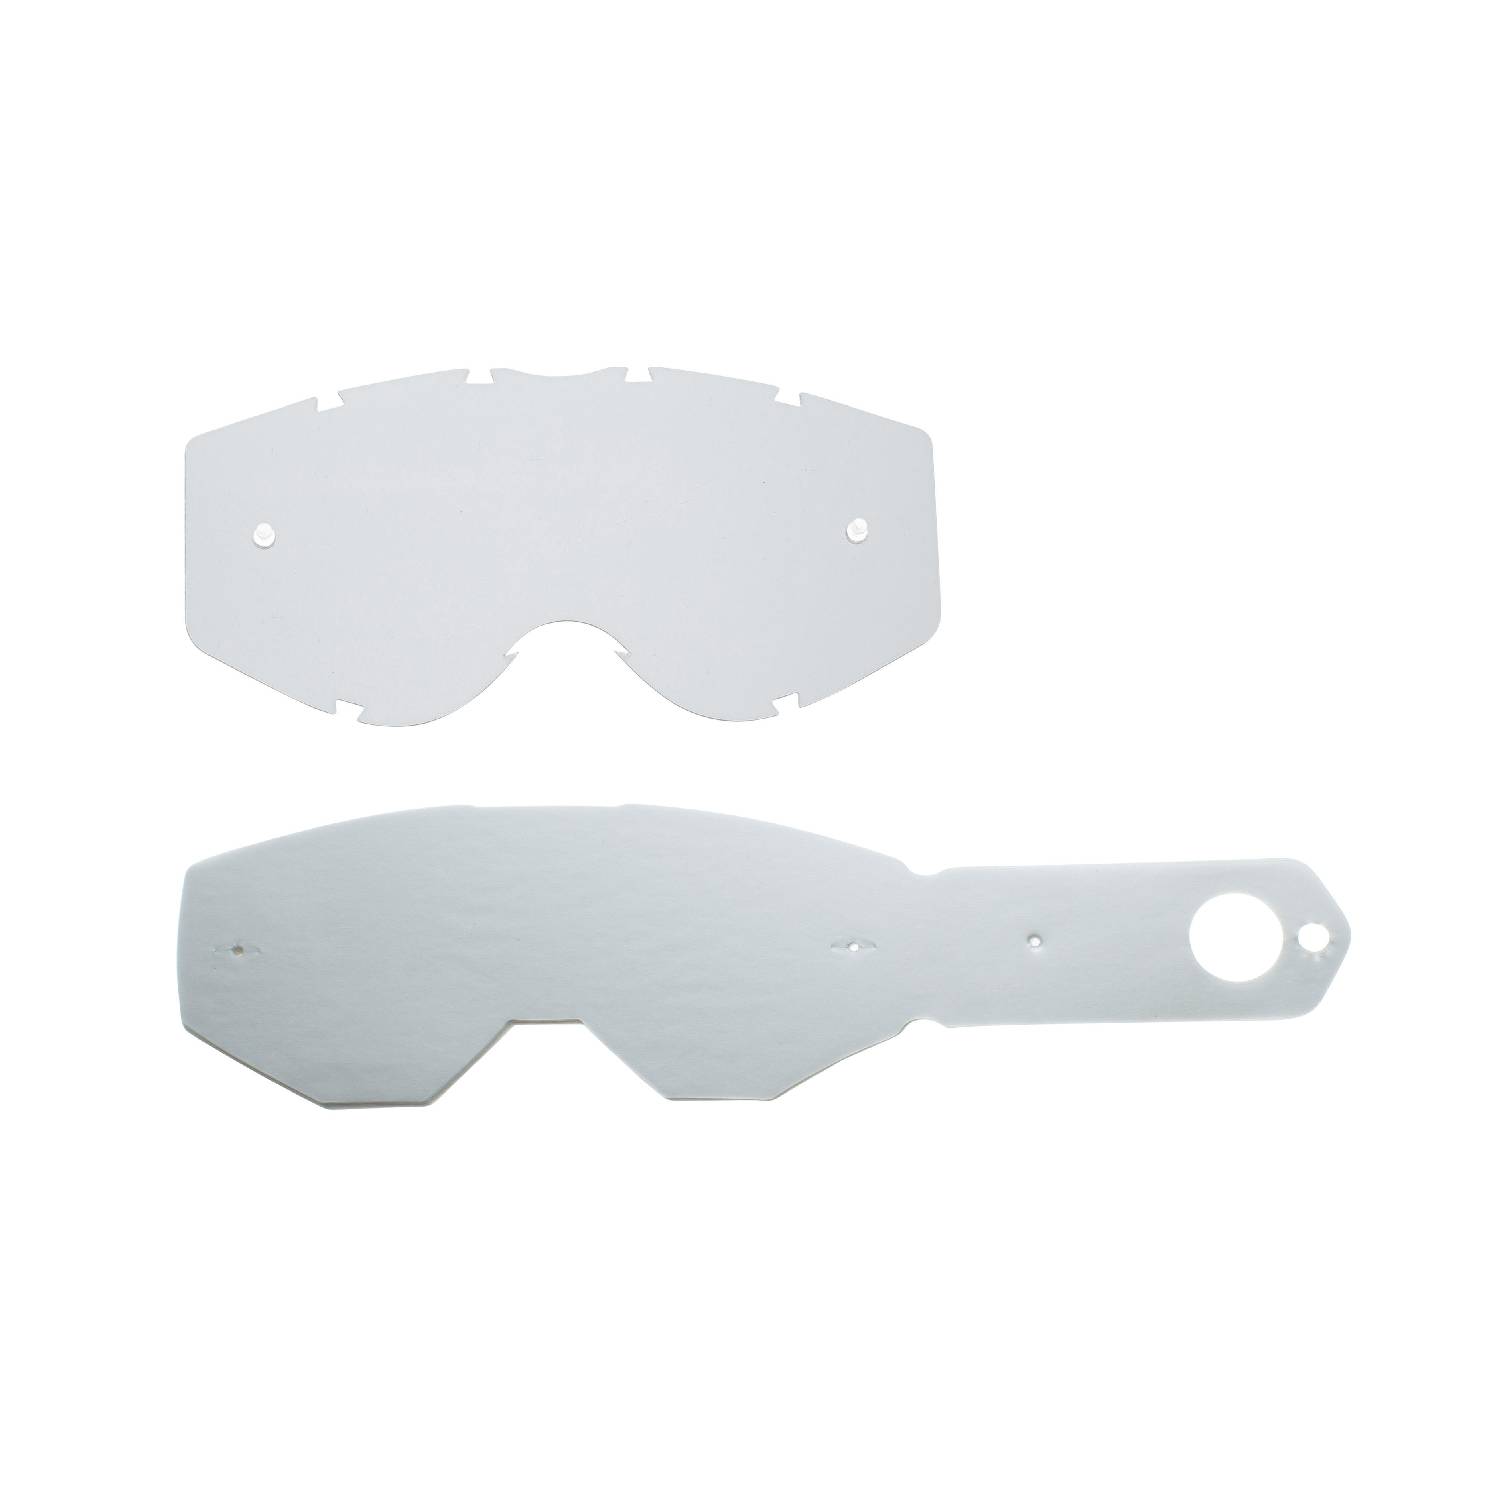 combo lenses with clear lenses with 10 tear off compatible for Progrip 3303 Vista goggle